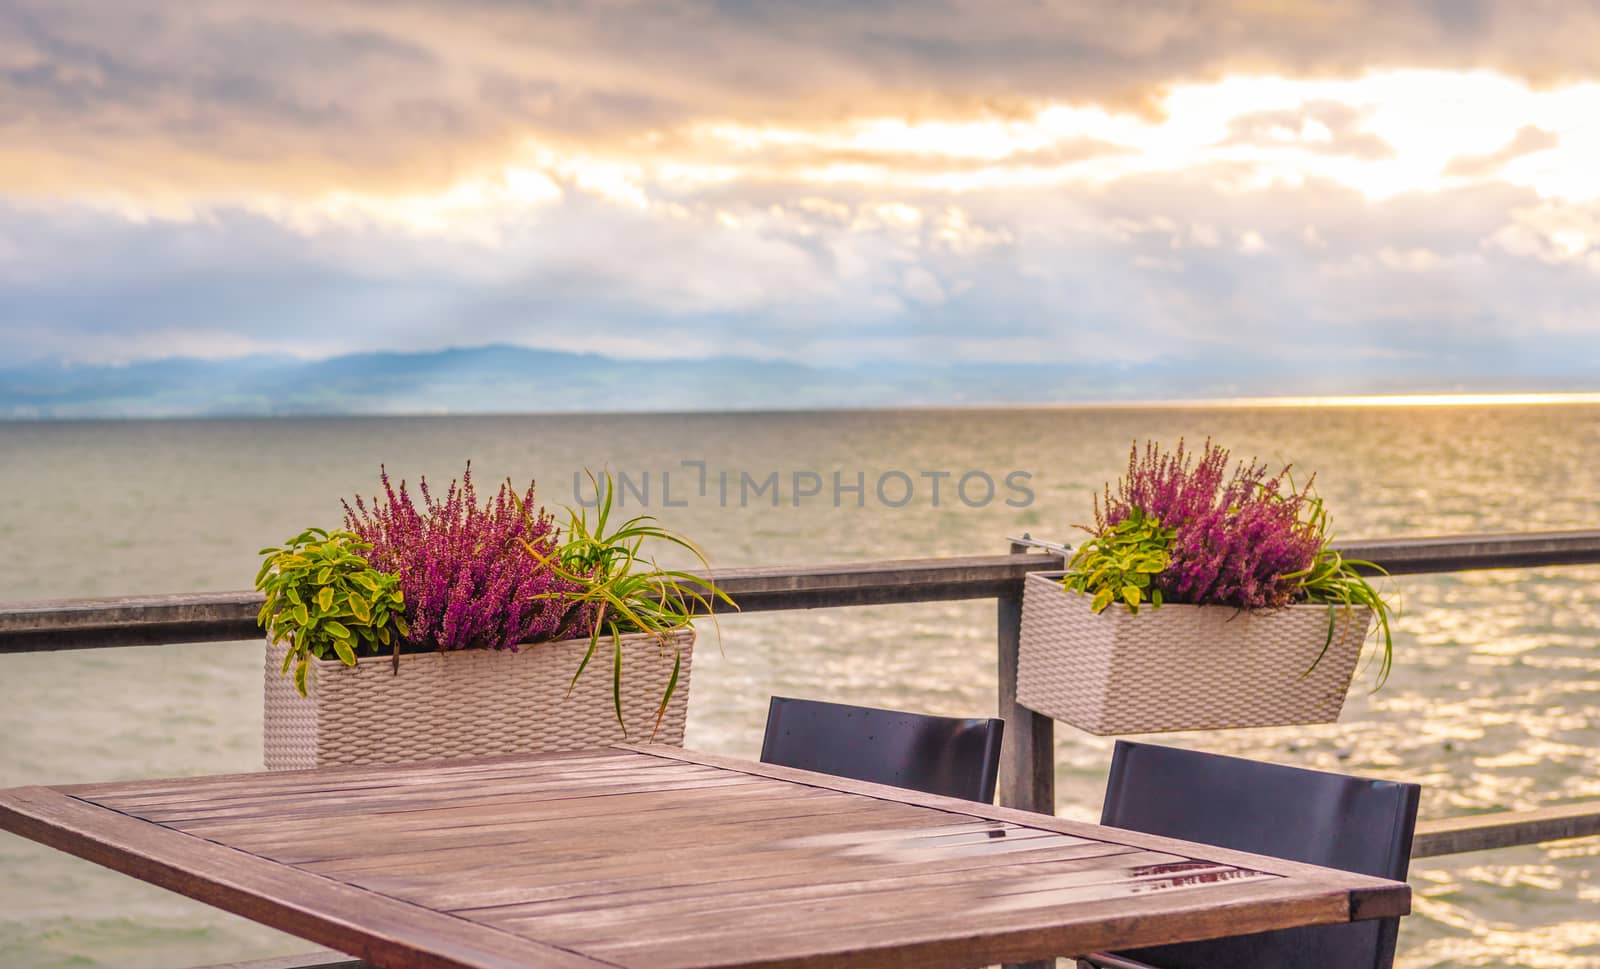 Conceptual image with an empty table, on a terrace, on the shore of the Bodensee lake, at sunset.